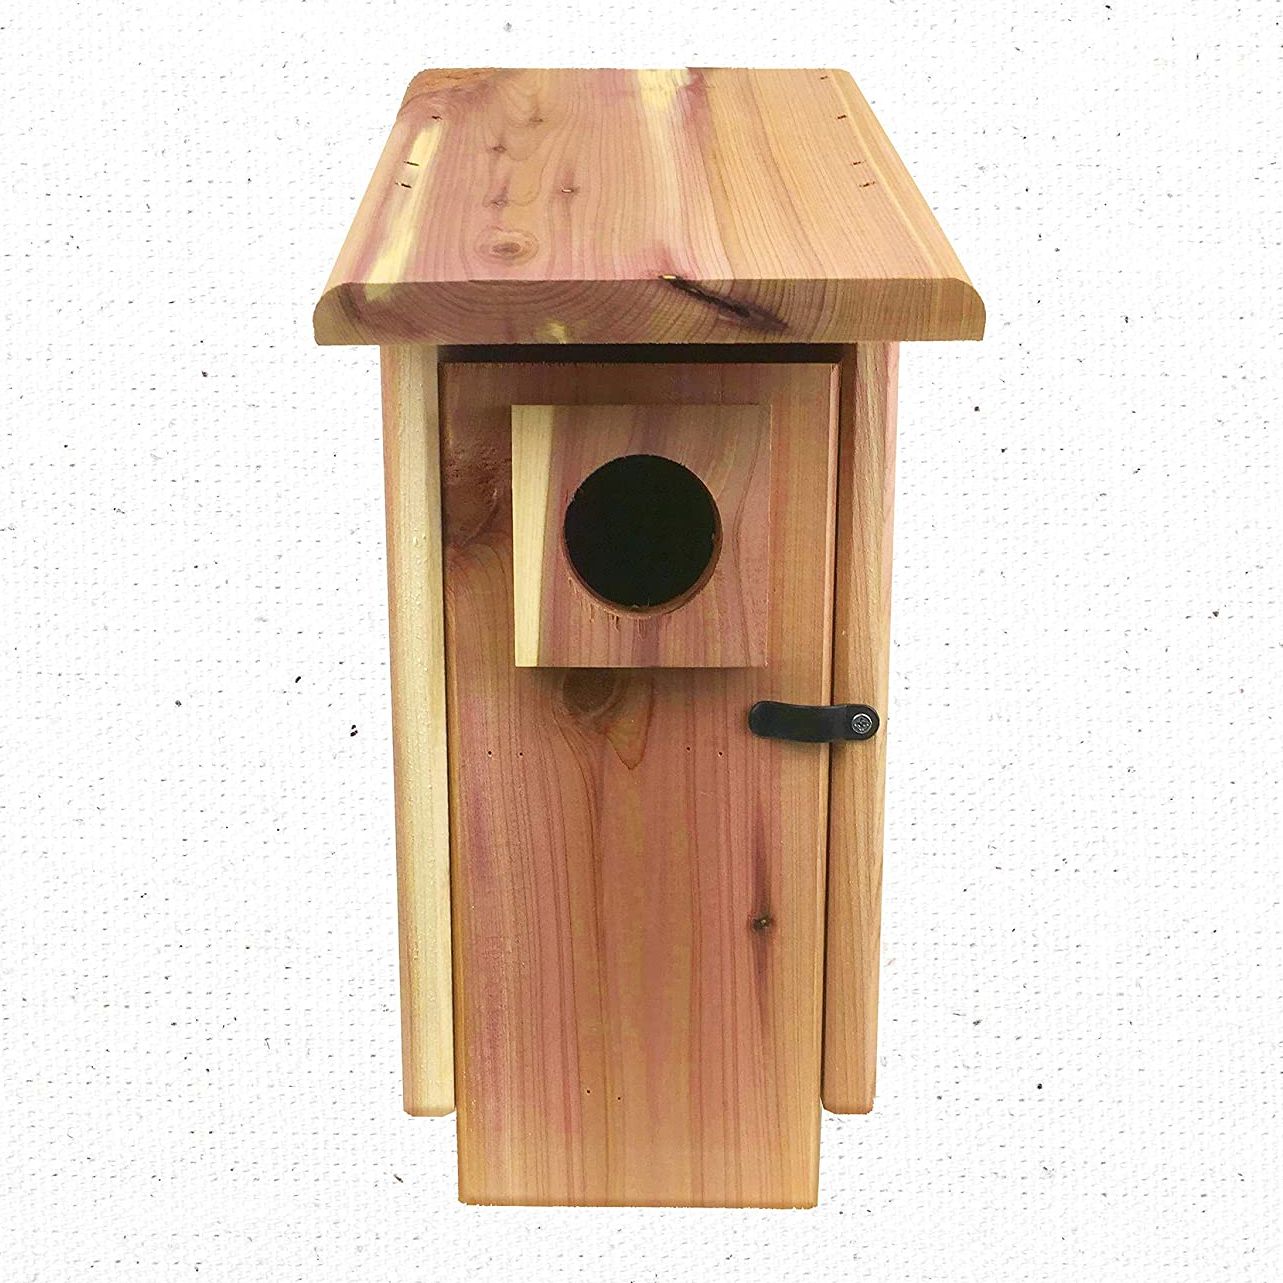 Multi Deals Wood Quality Fully Treated Bird Nest Box House Home Hotel 